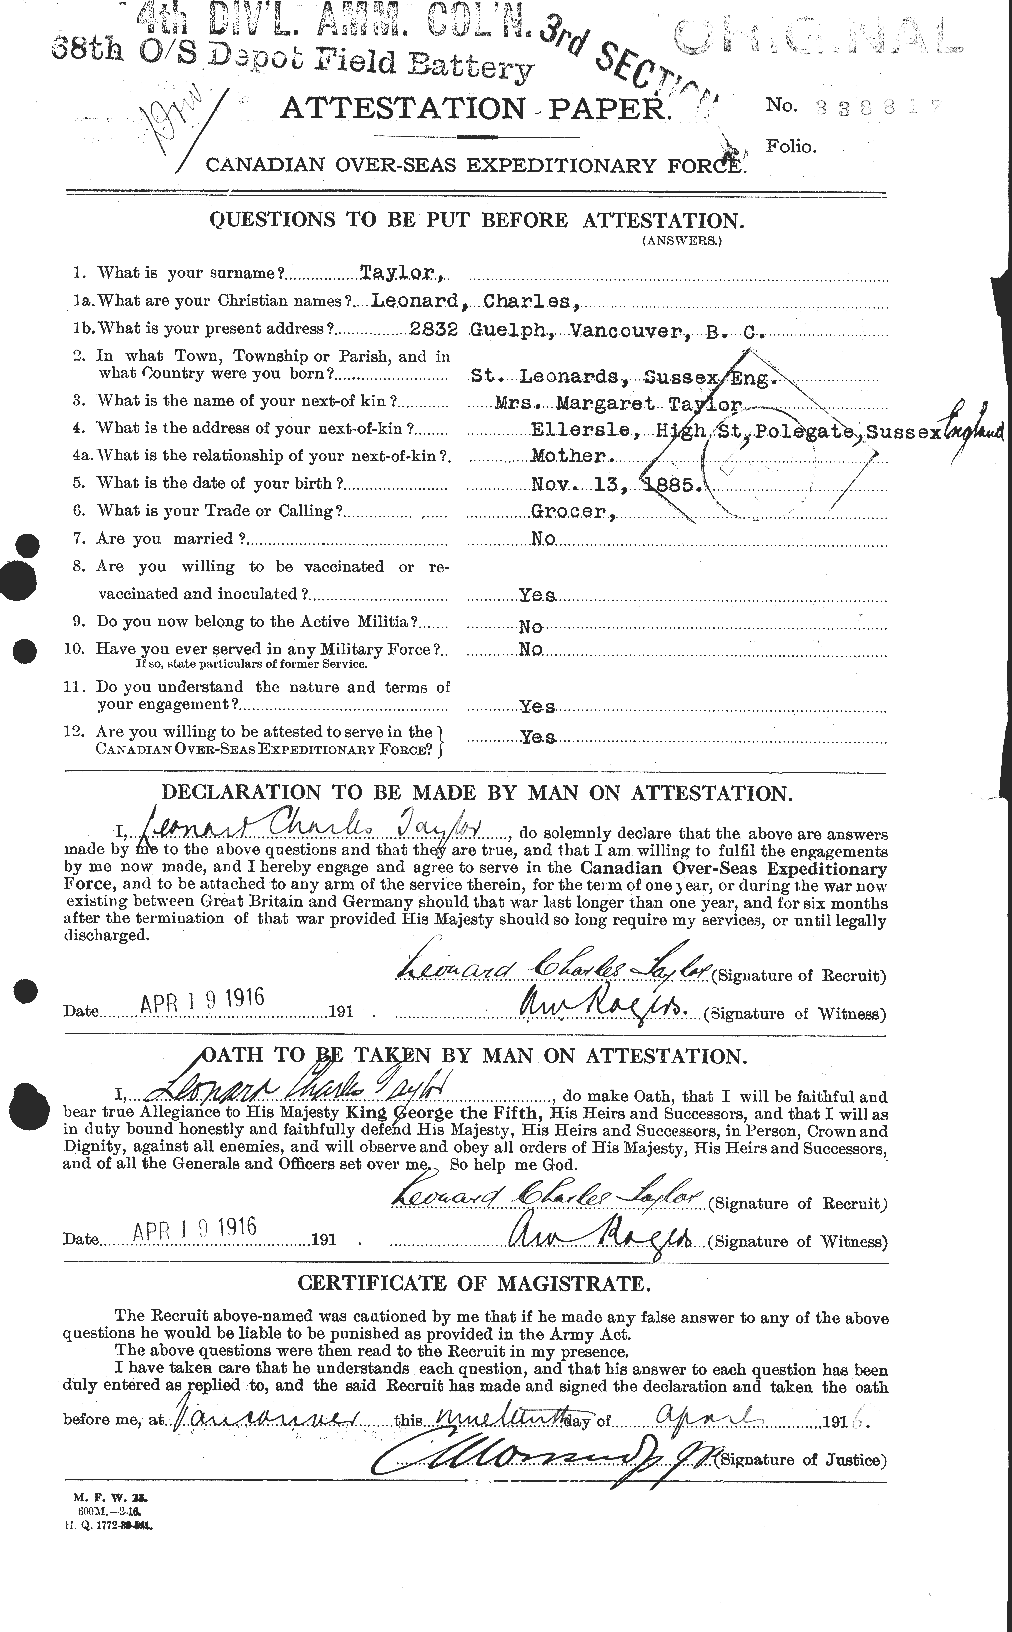 Personnel Records of the First World War - CEF 627627a